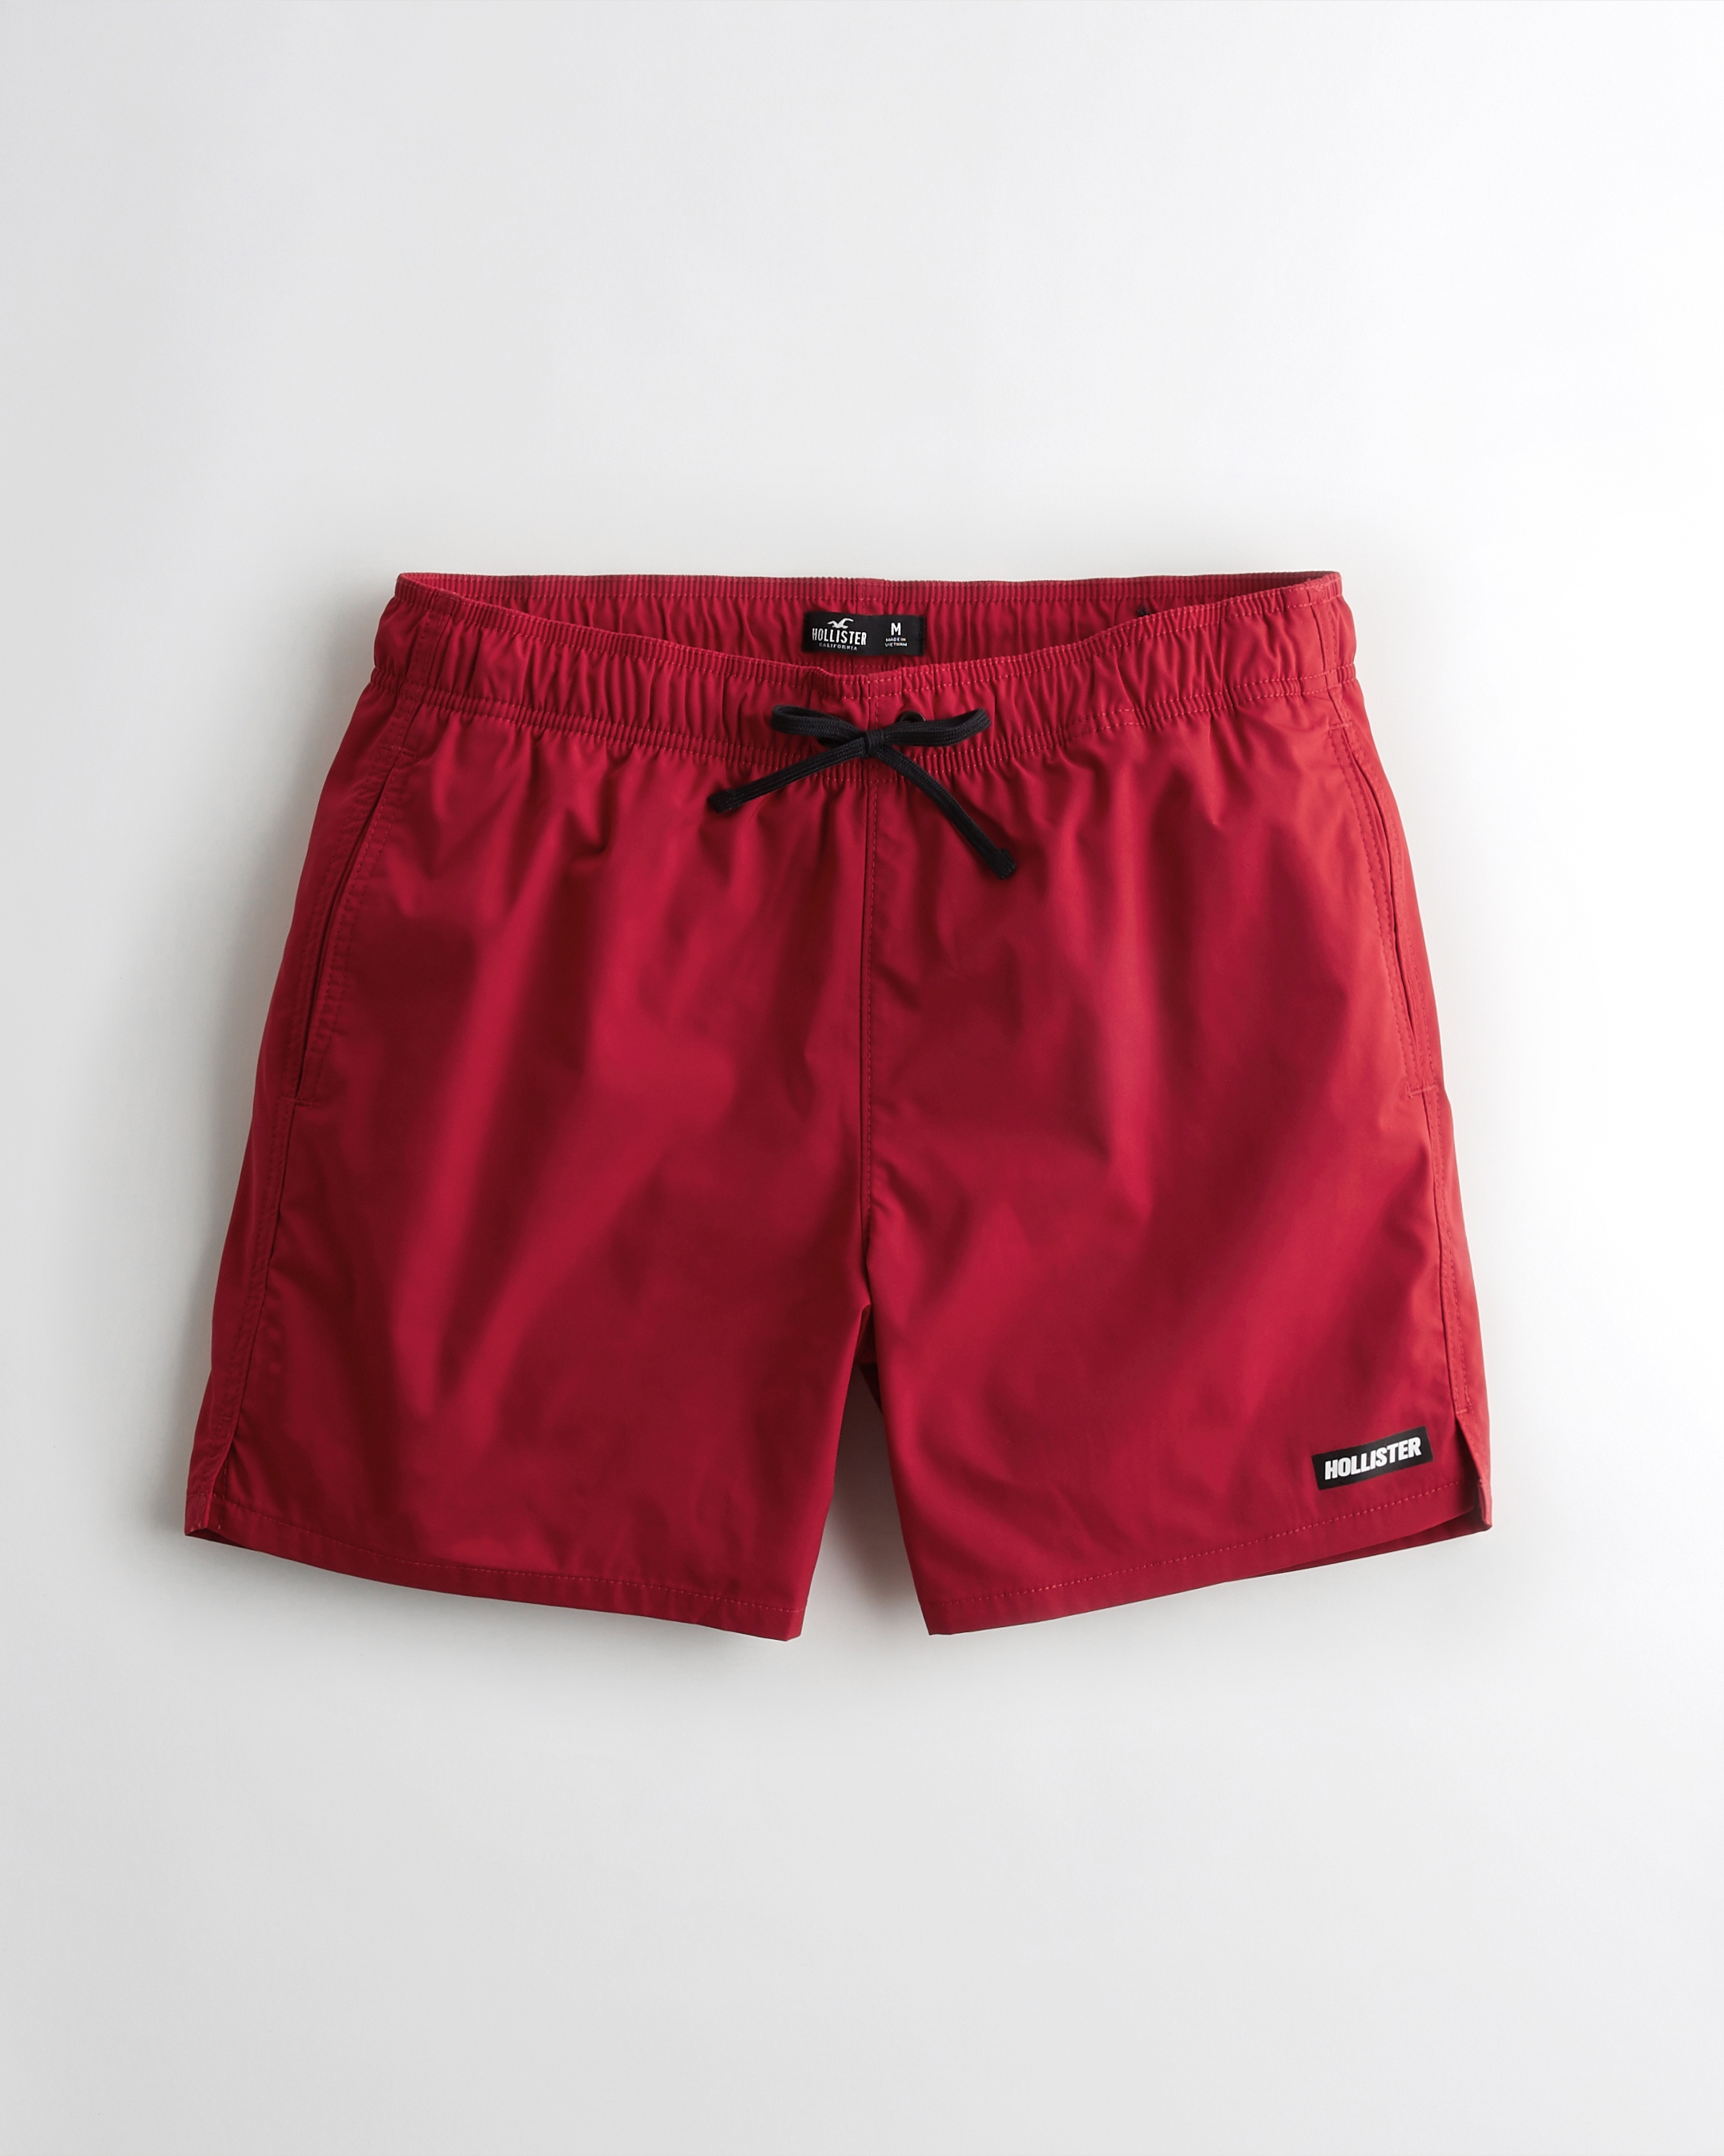 HOLLISTER Mens Swimming Shorts Medium Red Floral Polyester Hawaiian, Vintage & Second-Hand Clothing Online